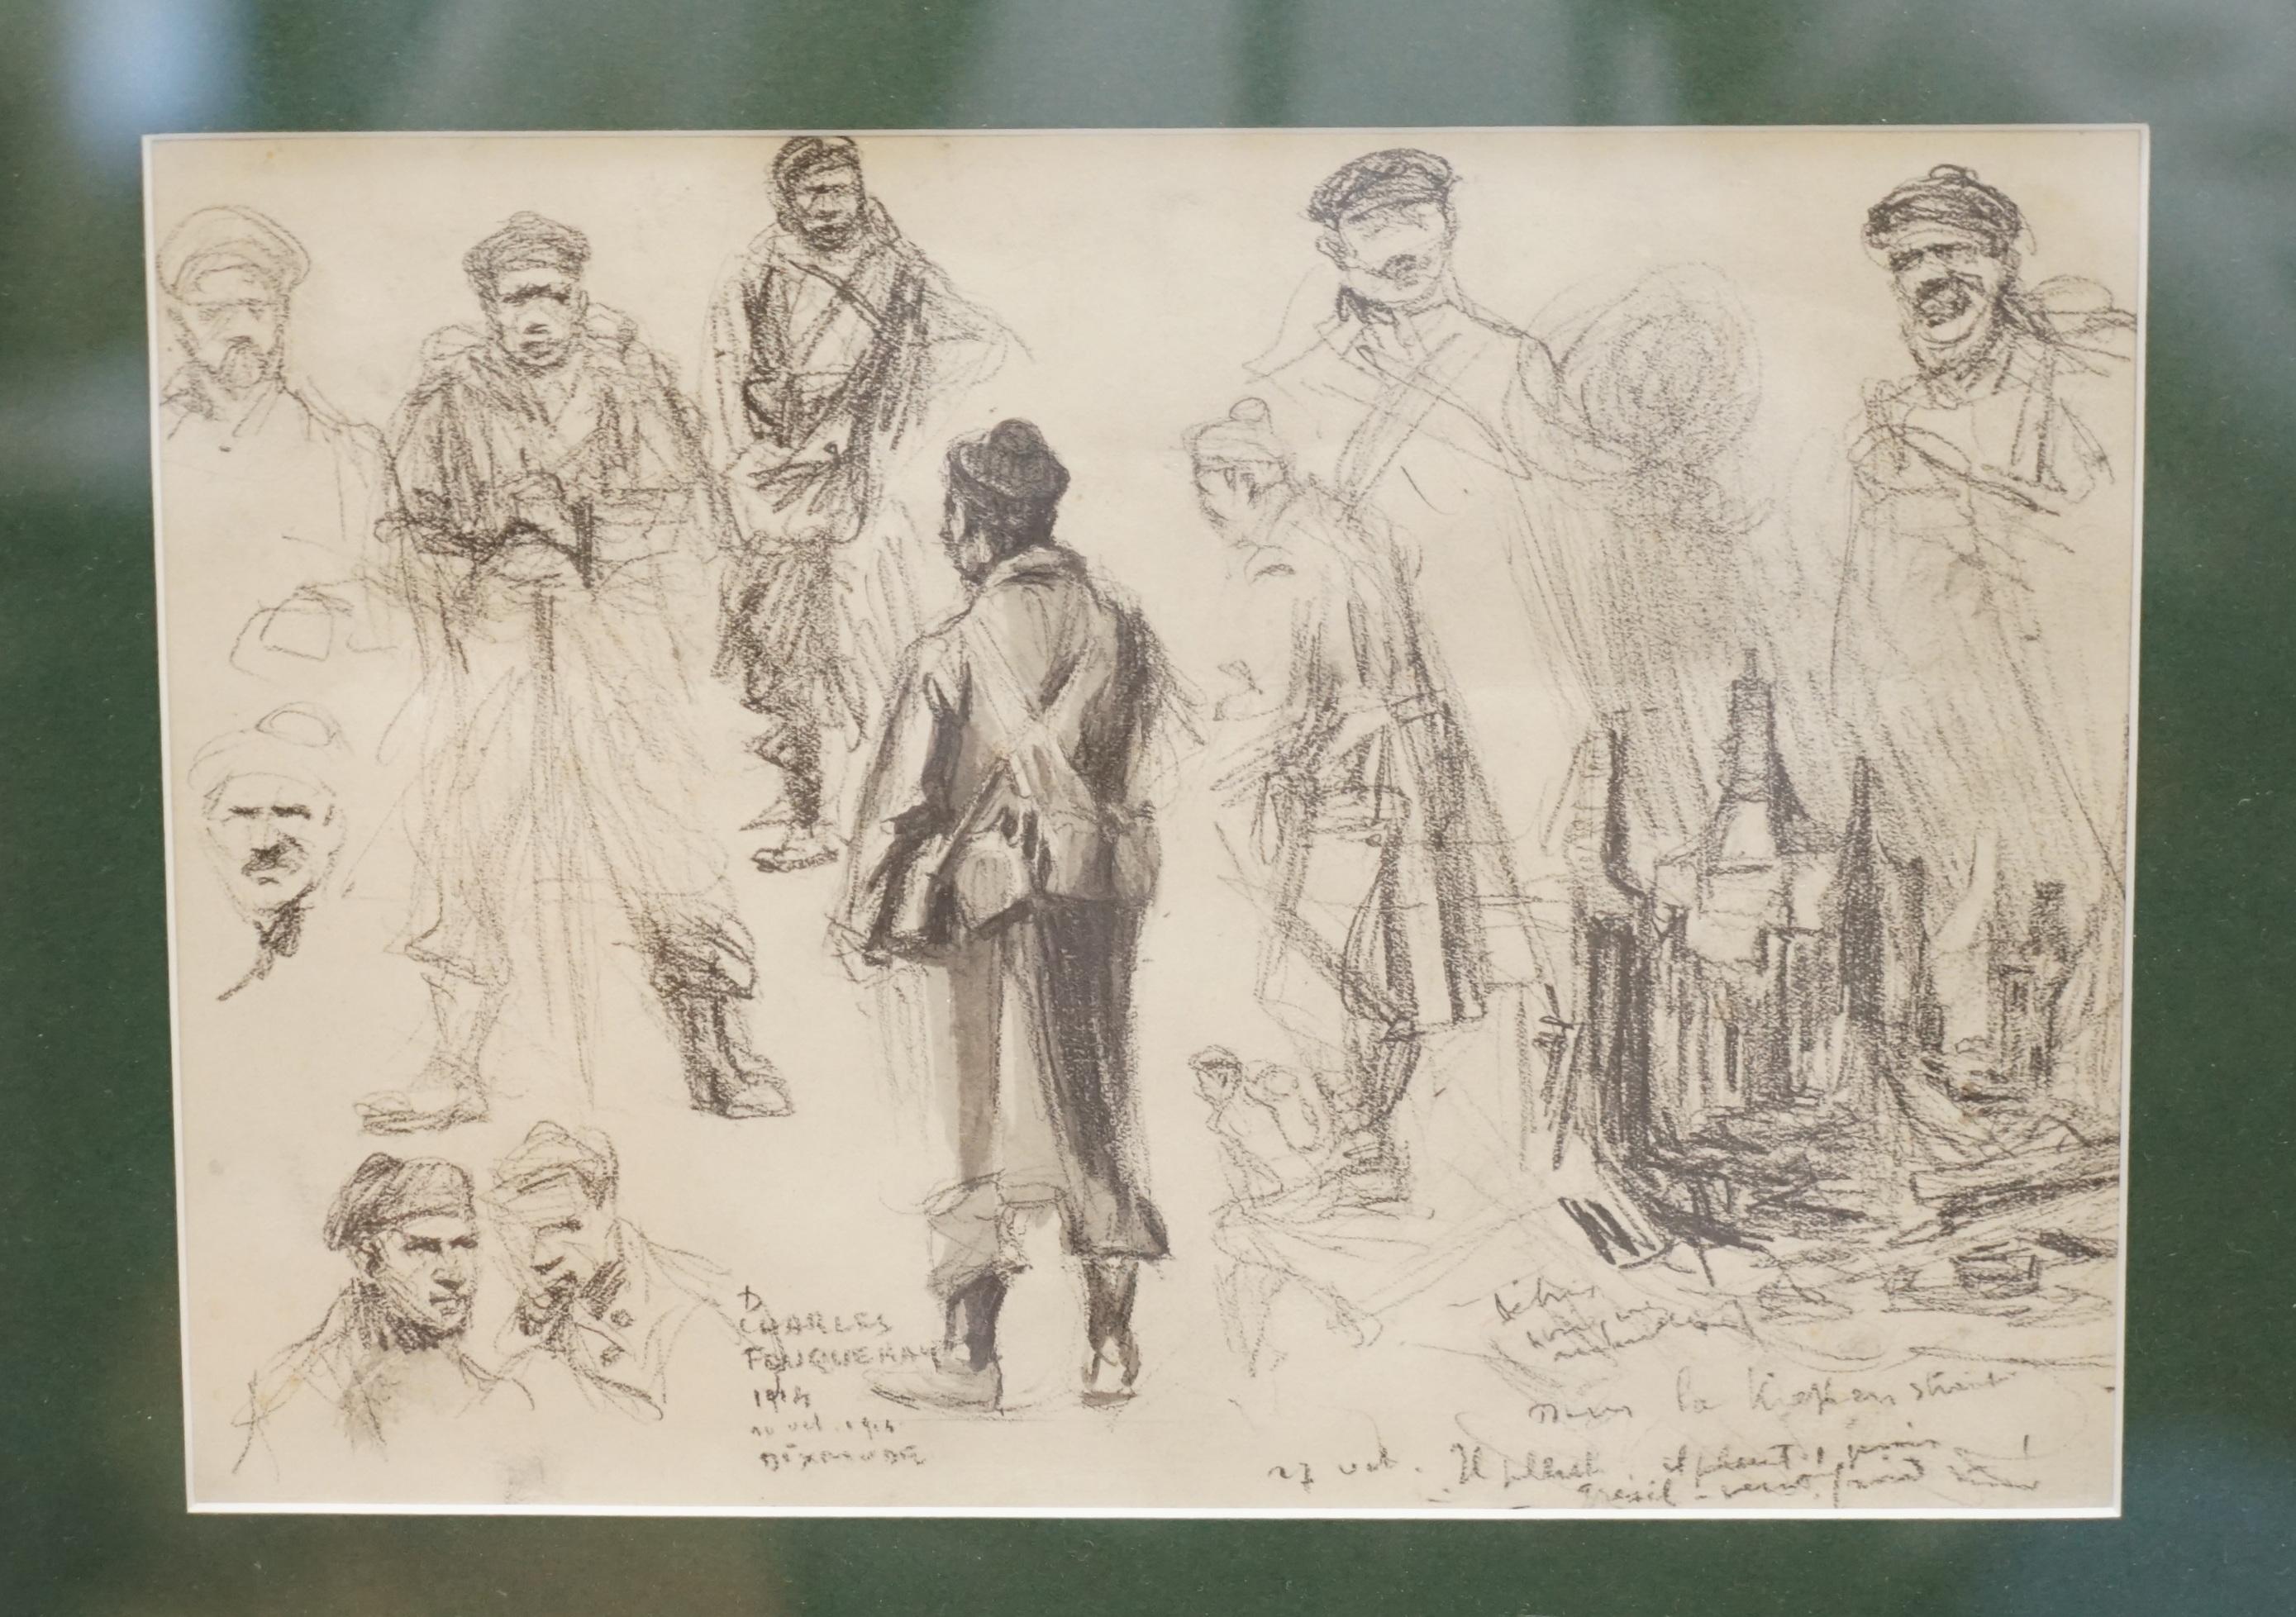 Edwardian Four World War I Signed Charles Dominique Fouquerary 1914 Water Colour Sketches For Sale